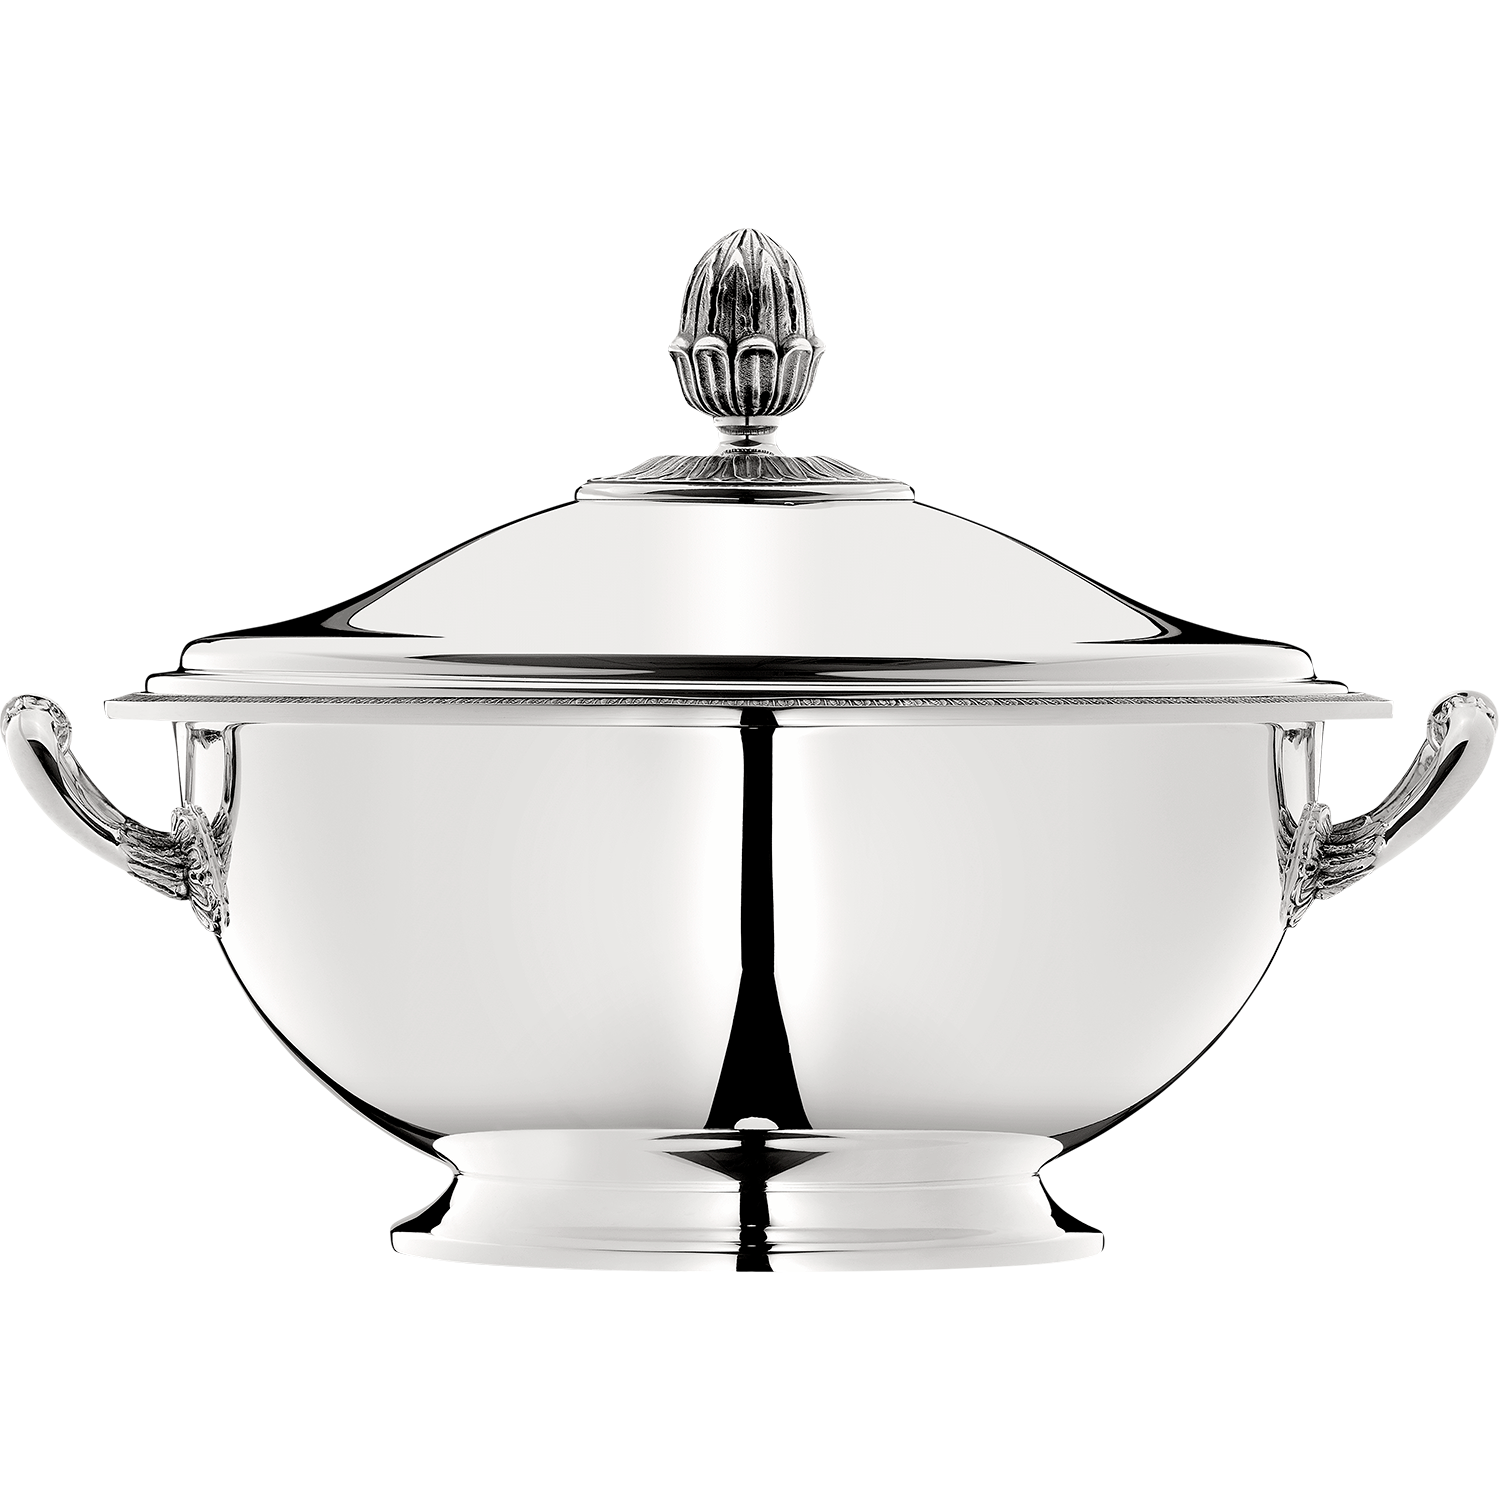 Silver-Plated soup tureen with lid